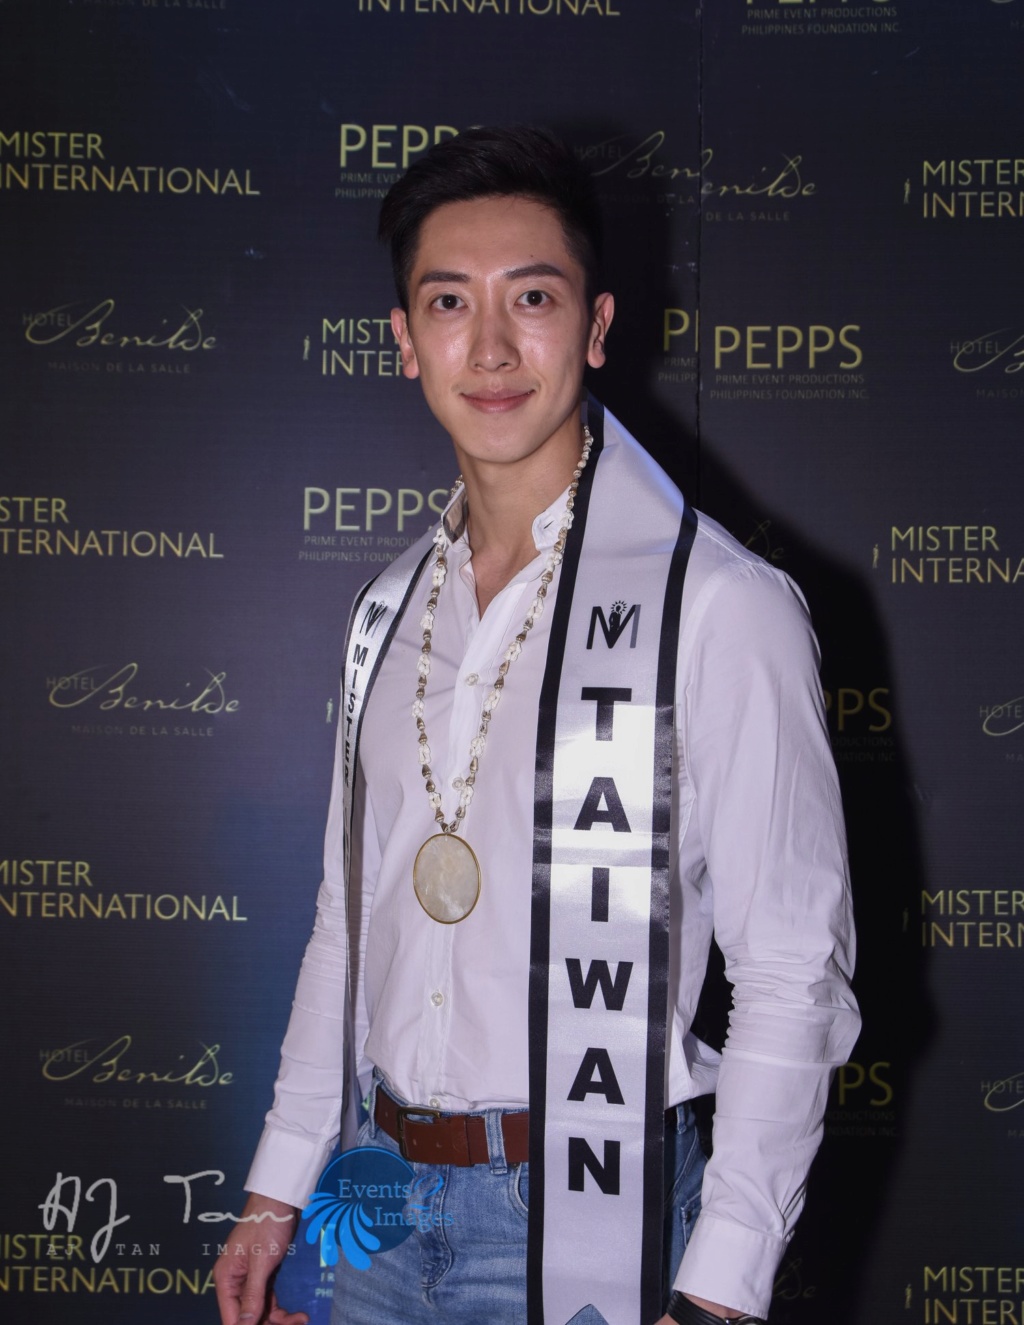 The 13th Mister International in Manila, Philippines on February 24,2019 - Page 7 52607810